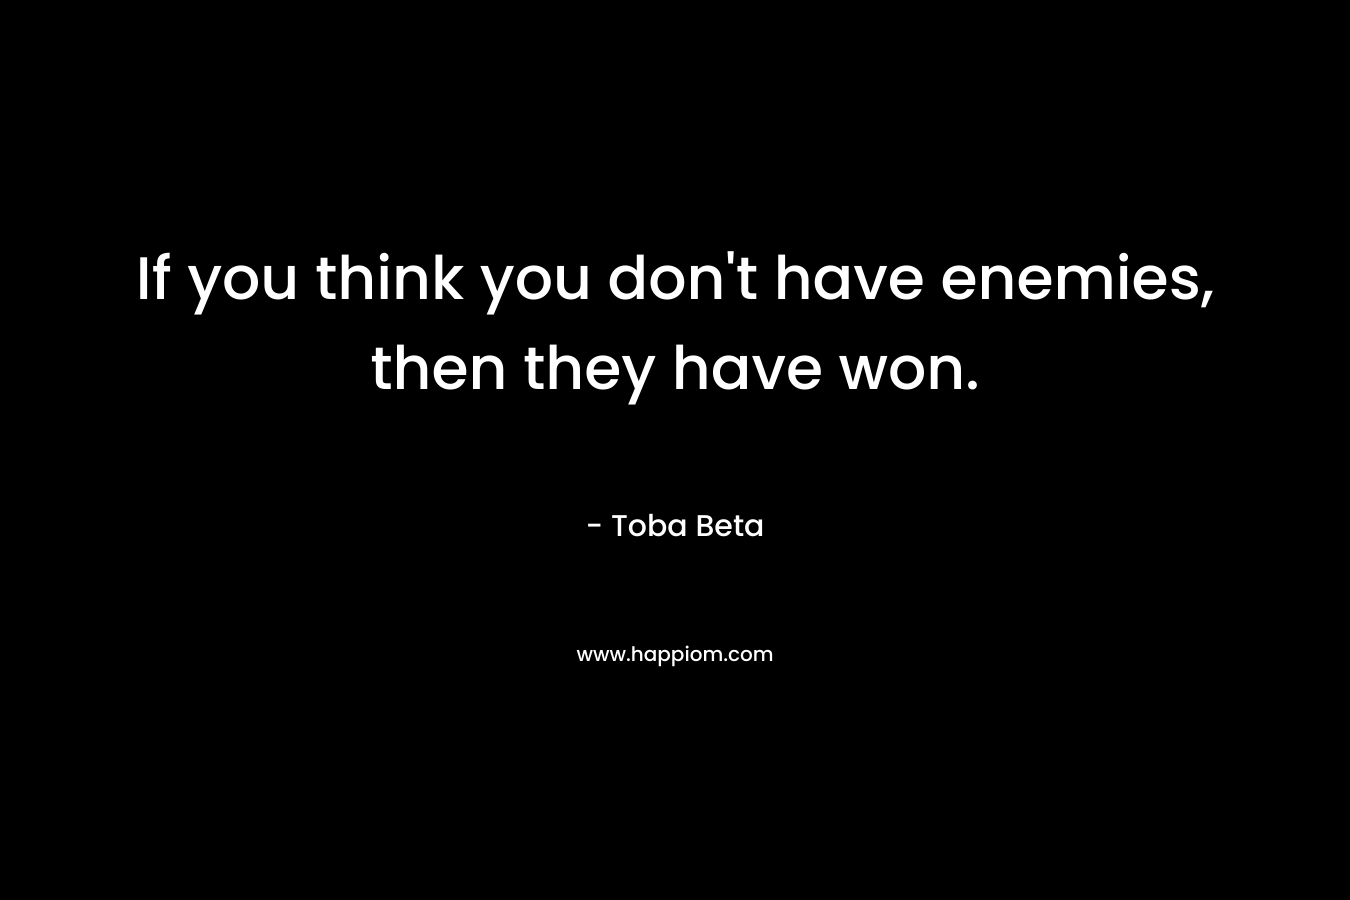 If you think you don’t have enemies, then they have won. – Toba Beta